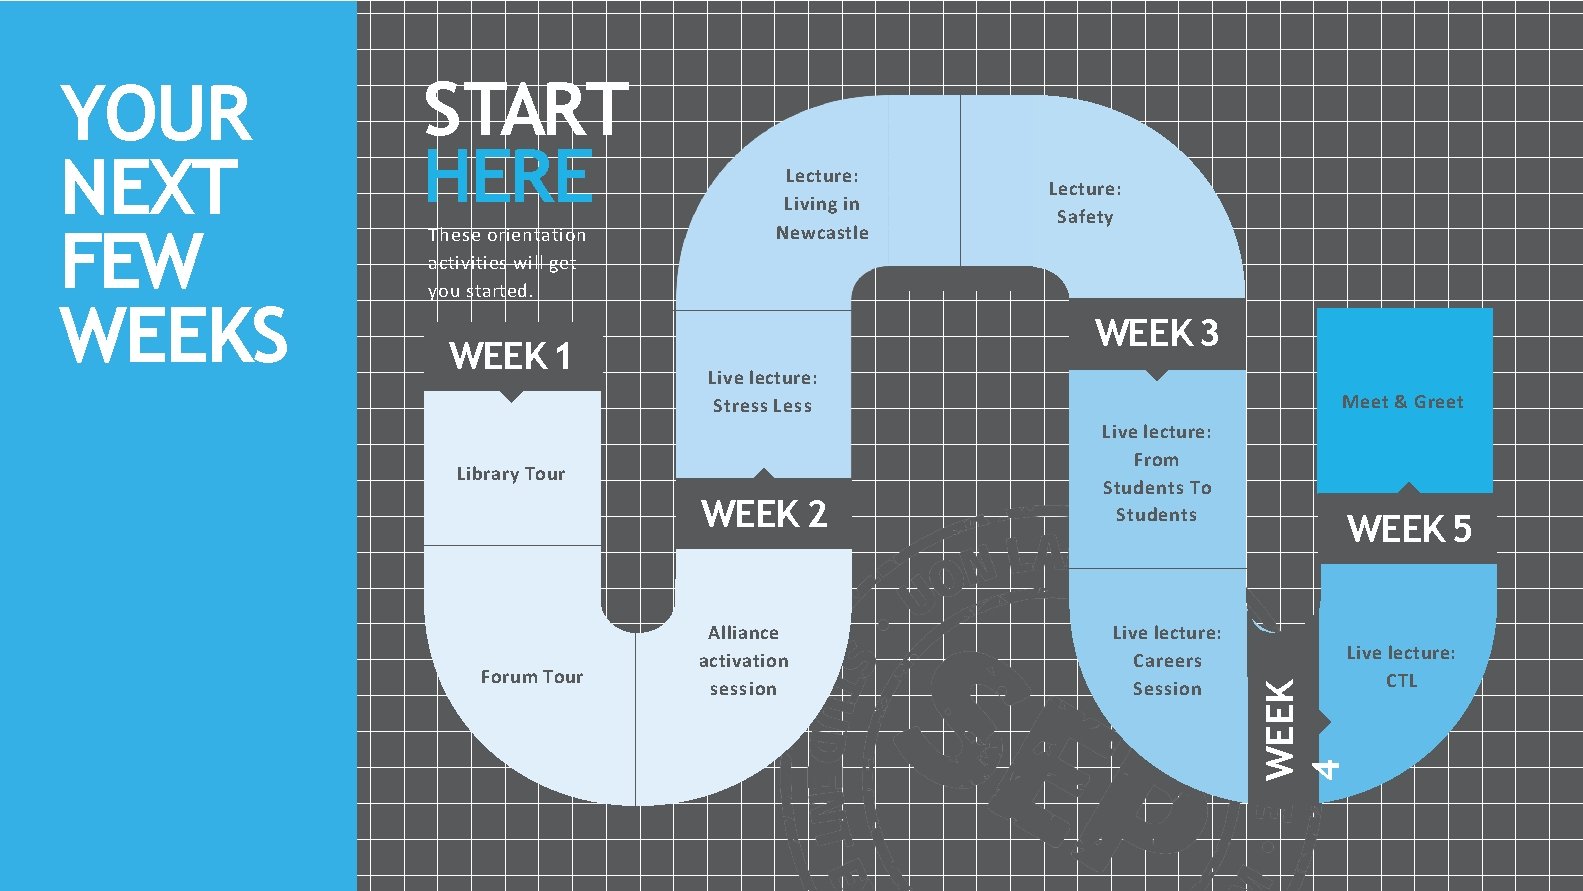 START HERE These orientation activities will get you started. WEEK 1 Lecture: Living in